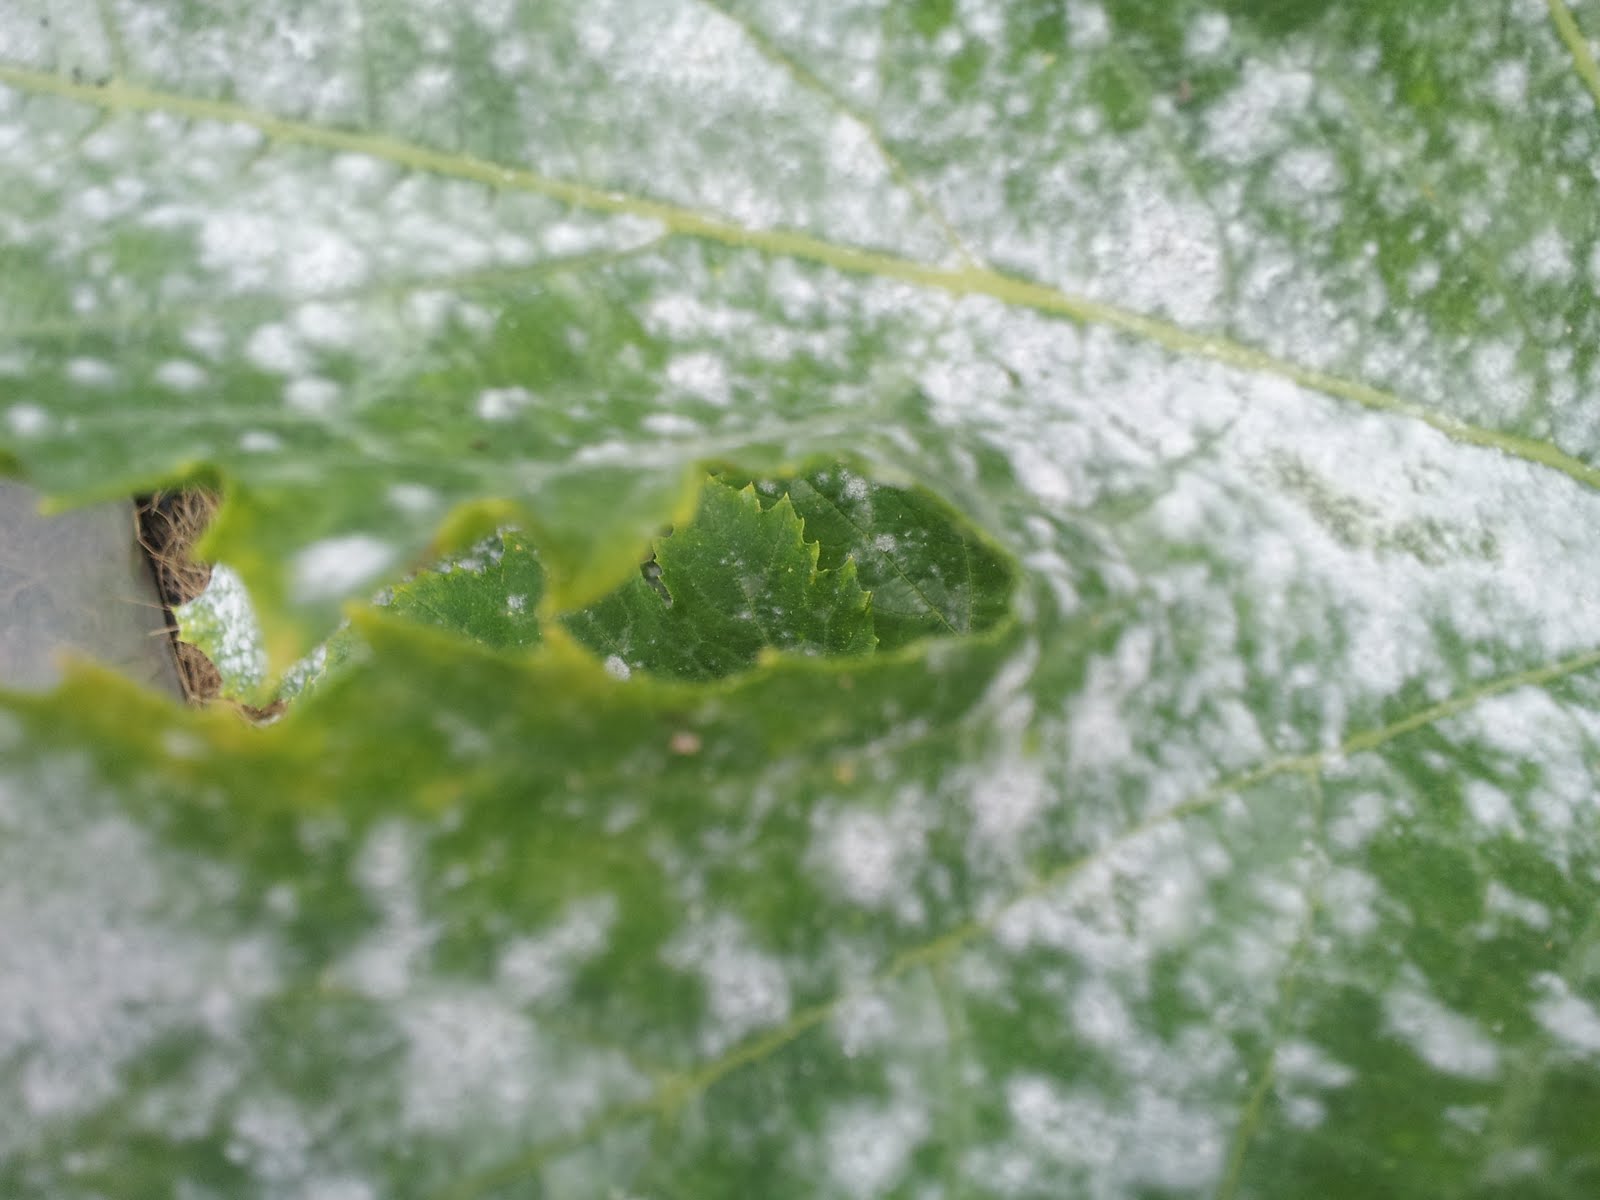 How to Treat Powdery Mildew Without Chemicals